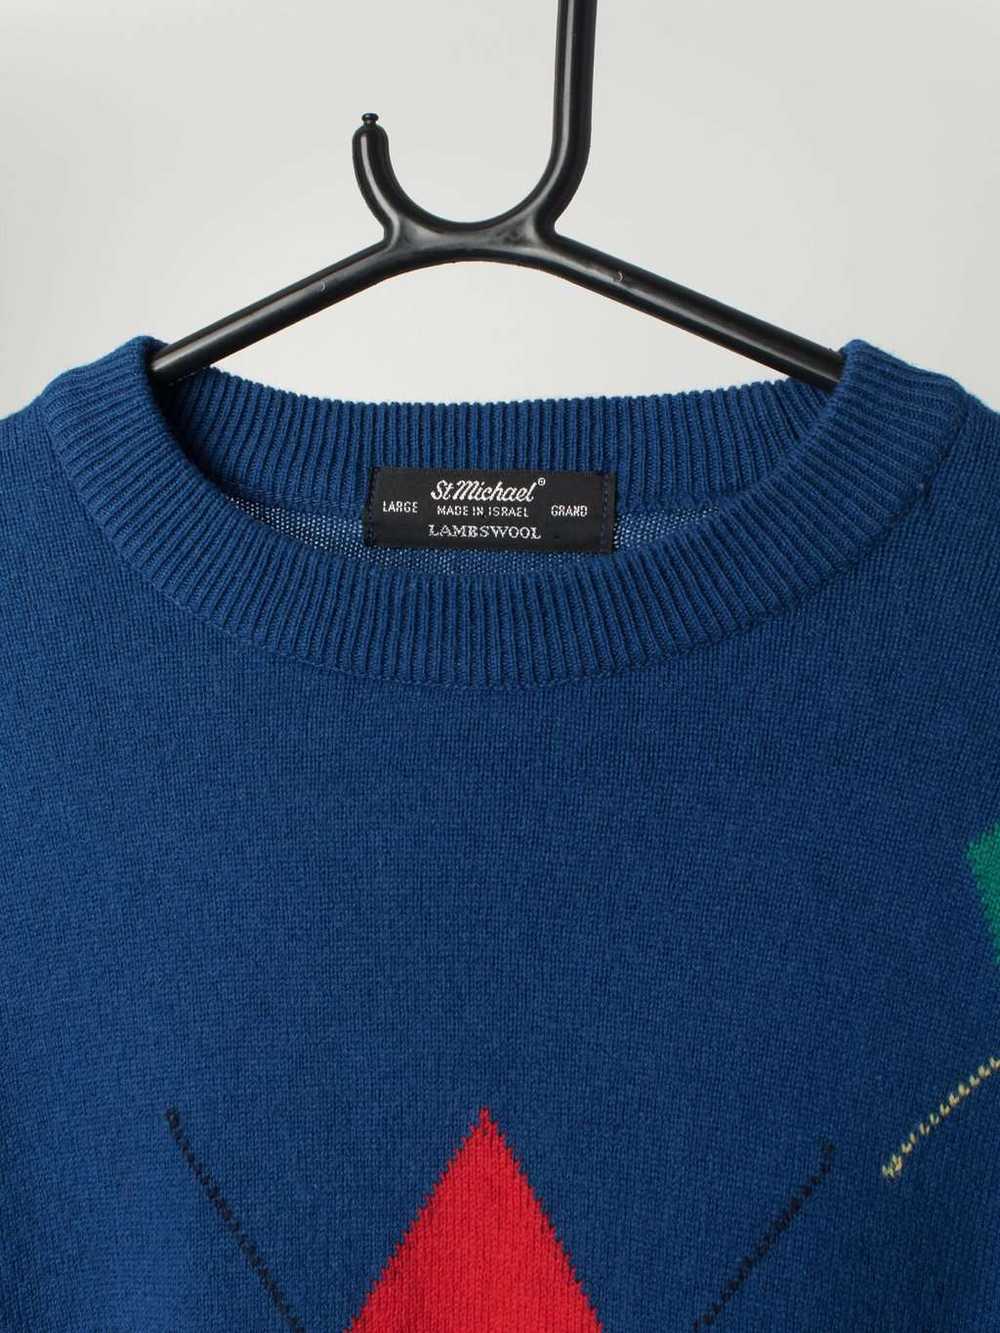 80s St Michael lambswool sweater in bold blue wit… - image 2